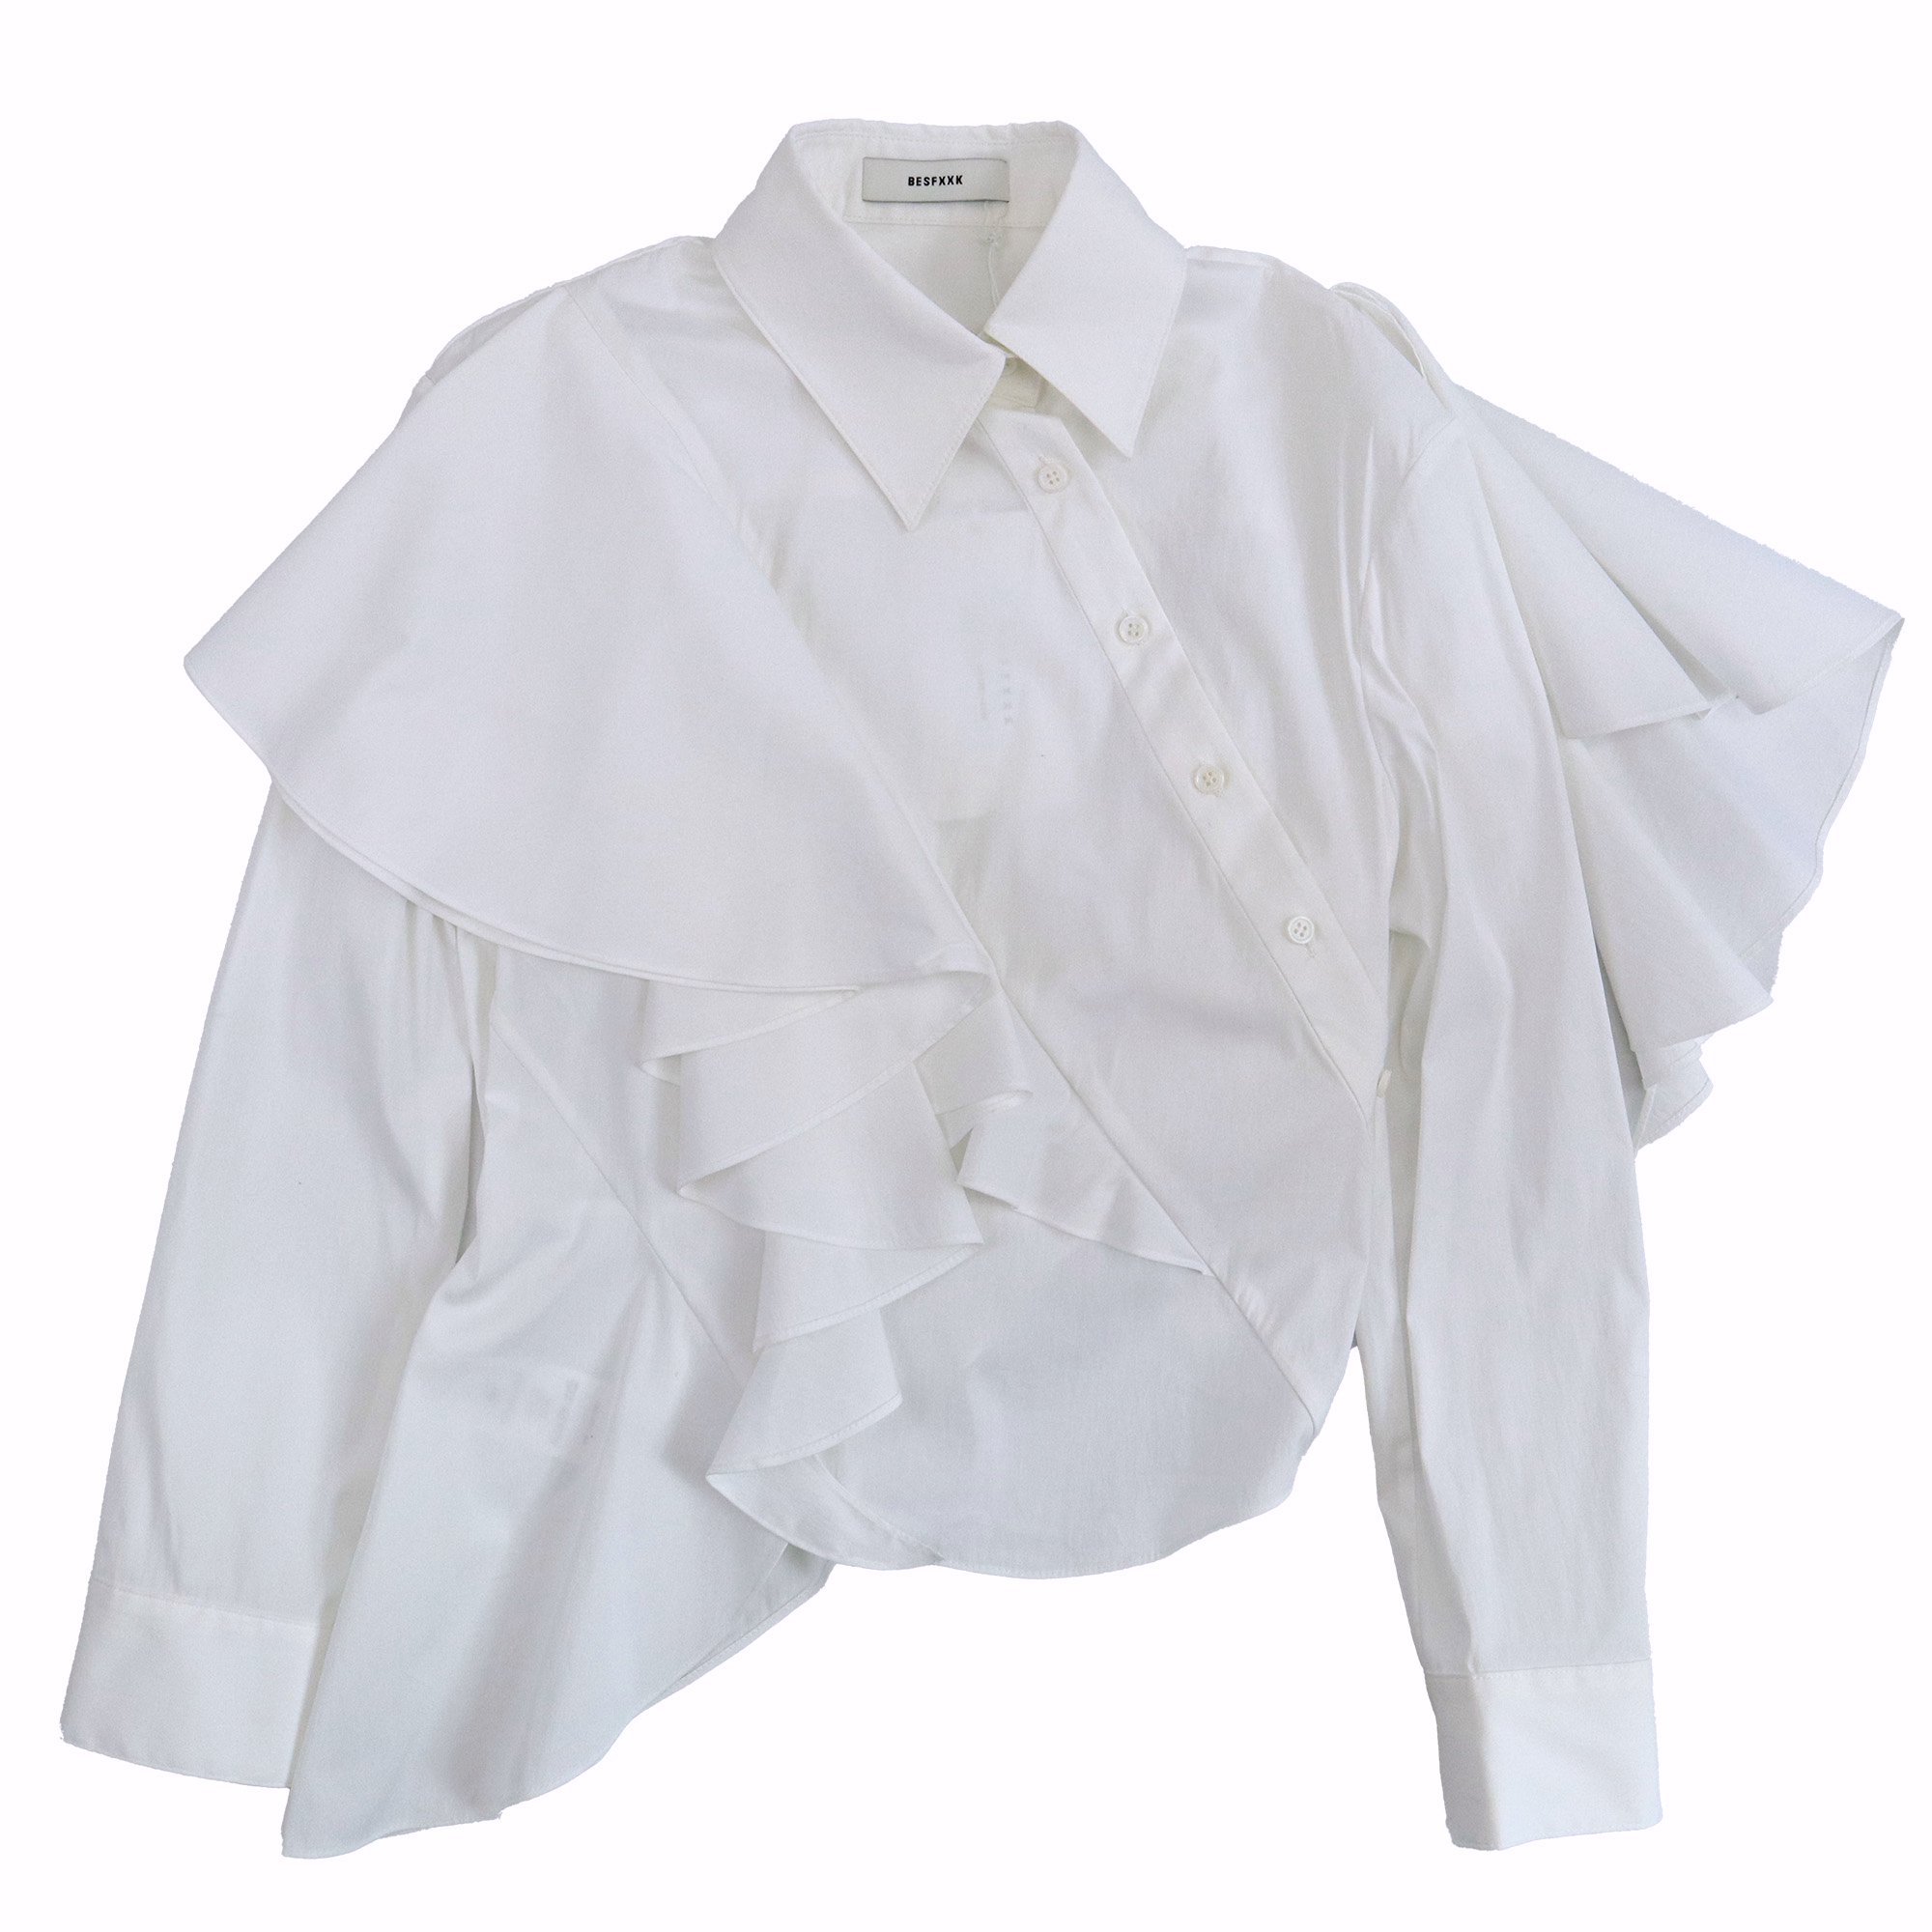 <img class='new_mark_img1' src='https://img.shop-pro.jp/img/new/icons7.gif' style='border:none;display:inline;margin:0px;padding:0px;width:auto;' />BESFXXK L/S BLOUSE【WHITE】